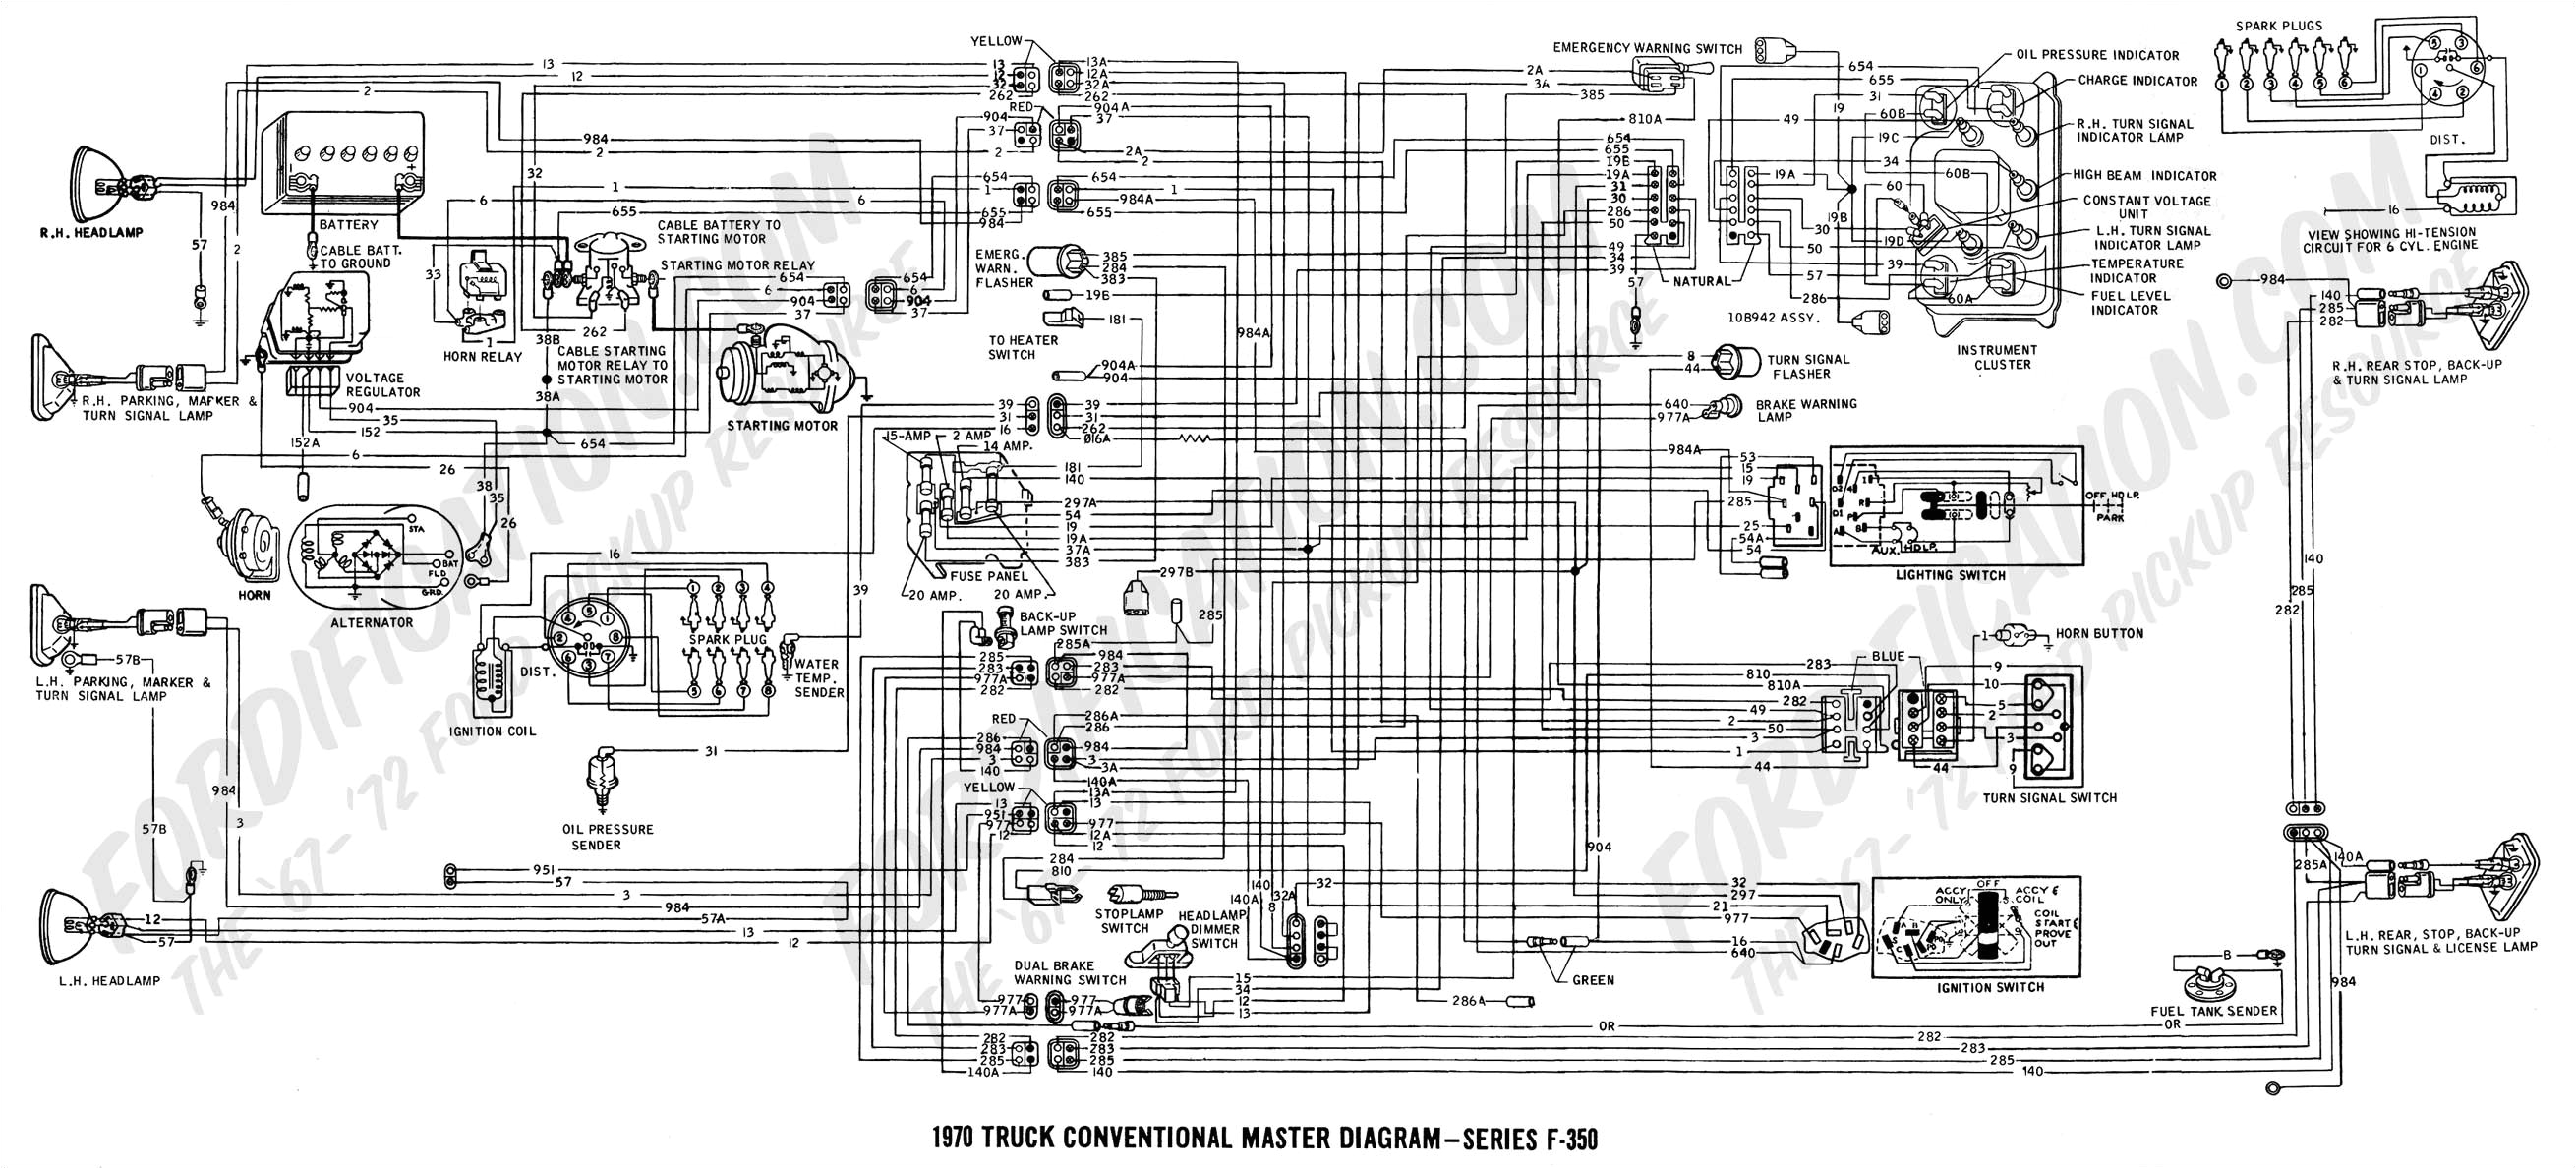 ford f350 wiring harness diagrams wiring diagram view 2004 ford f350 trailer wiring harness 2004 f350